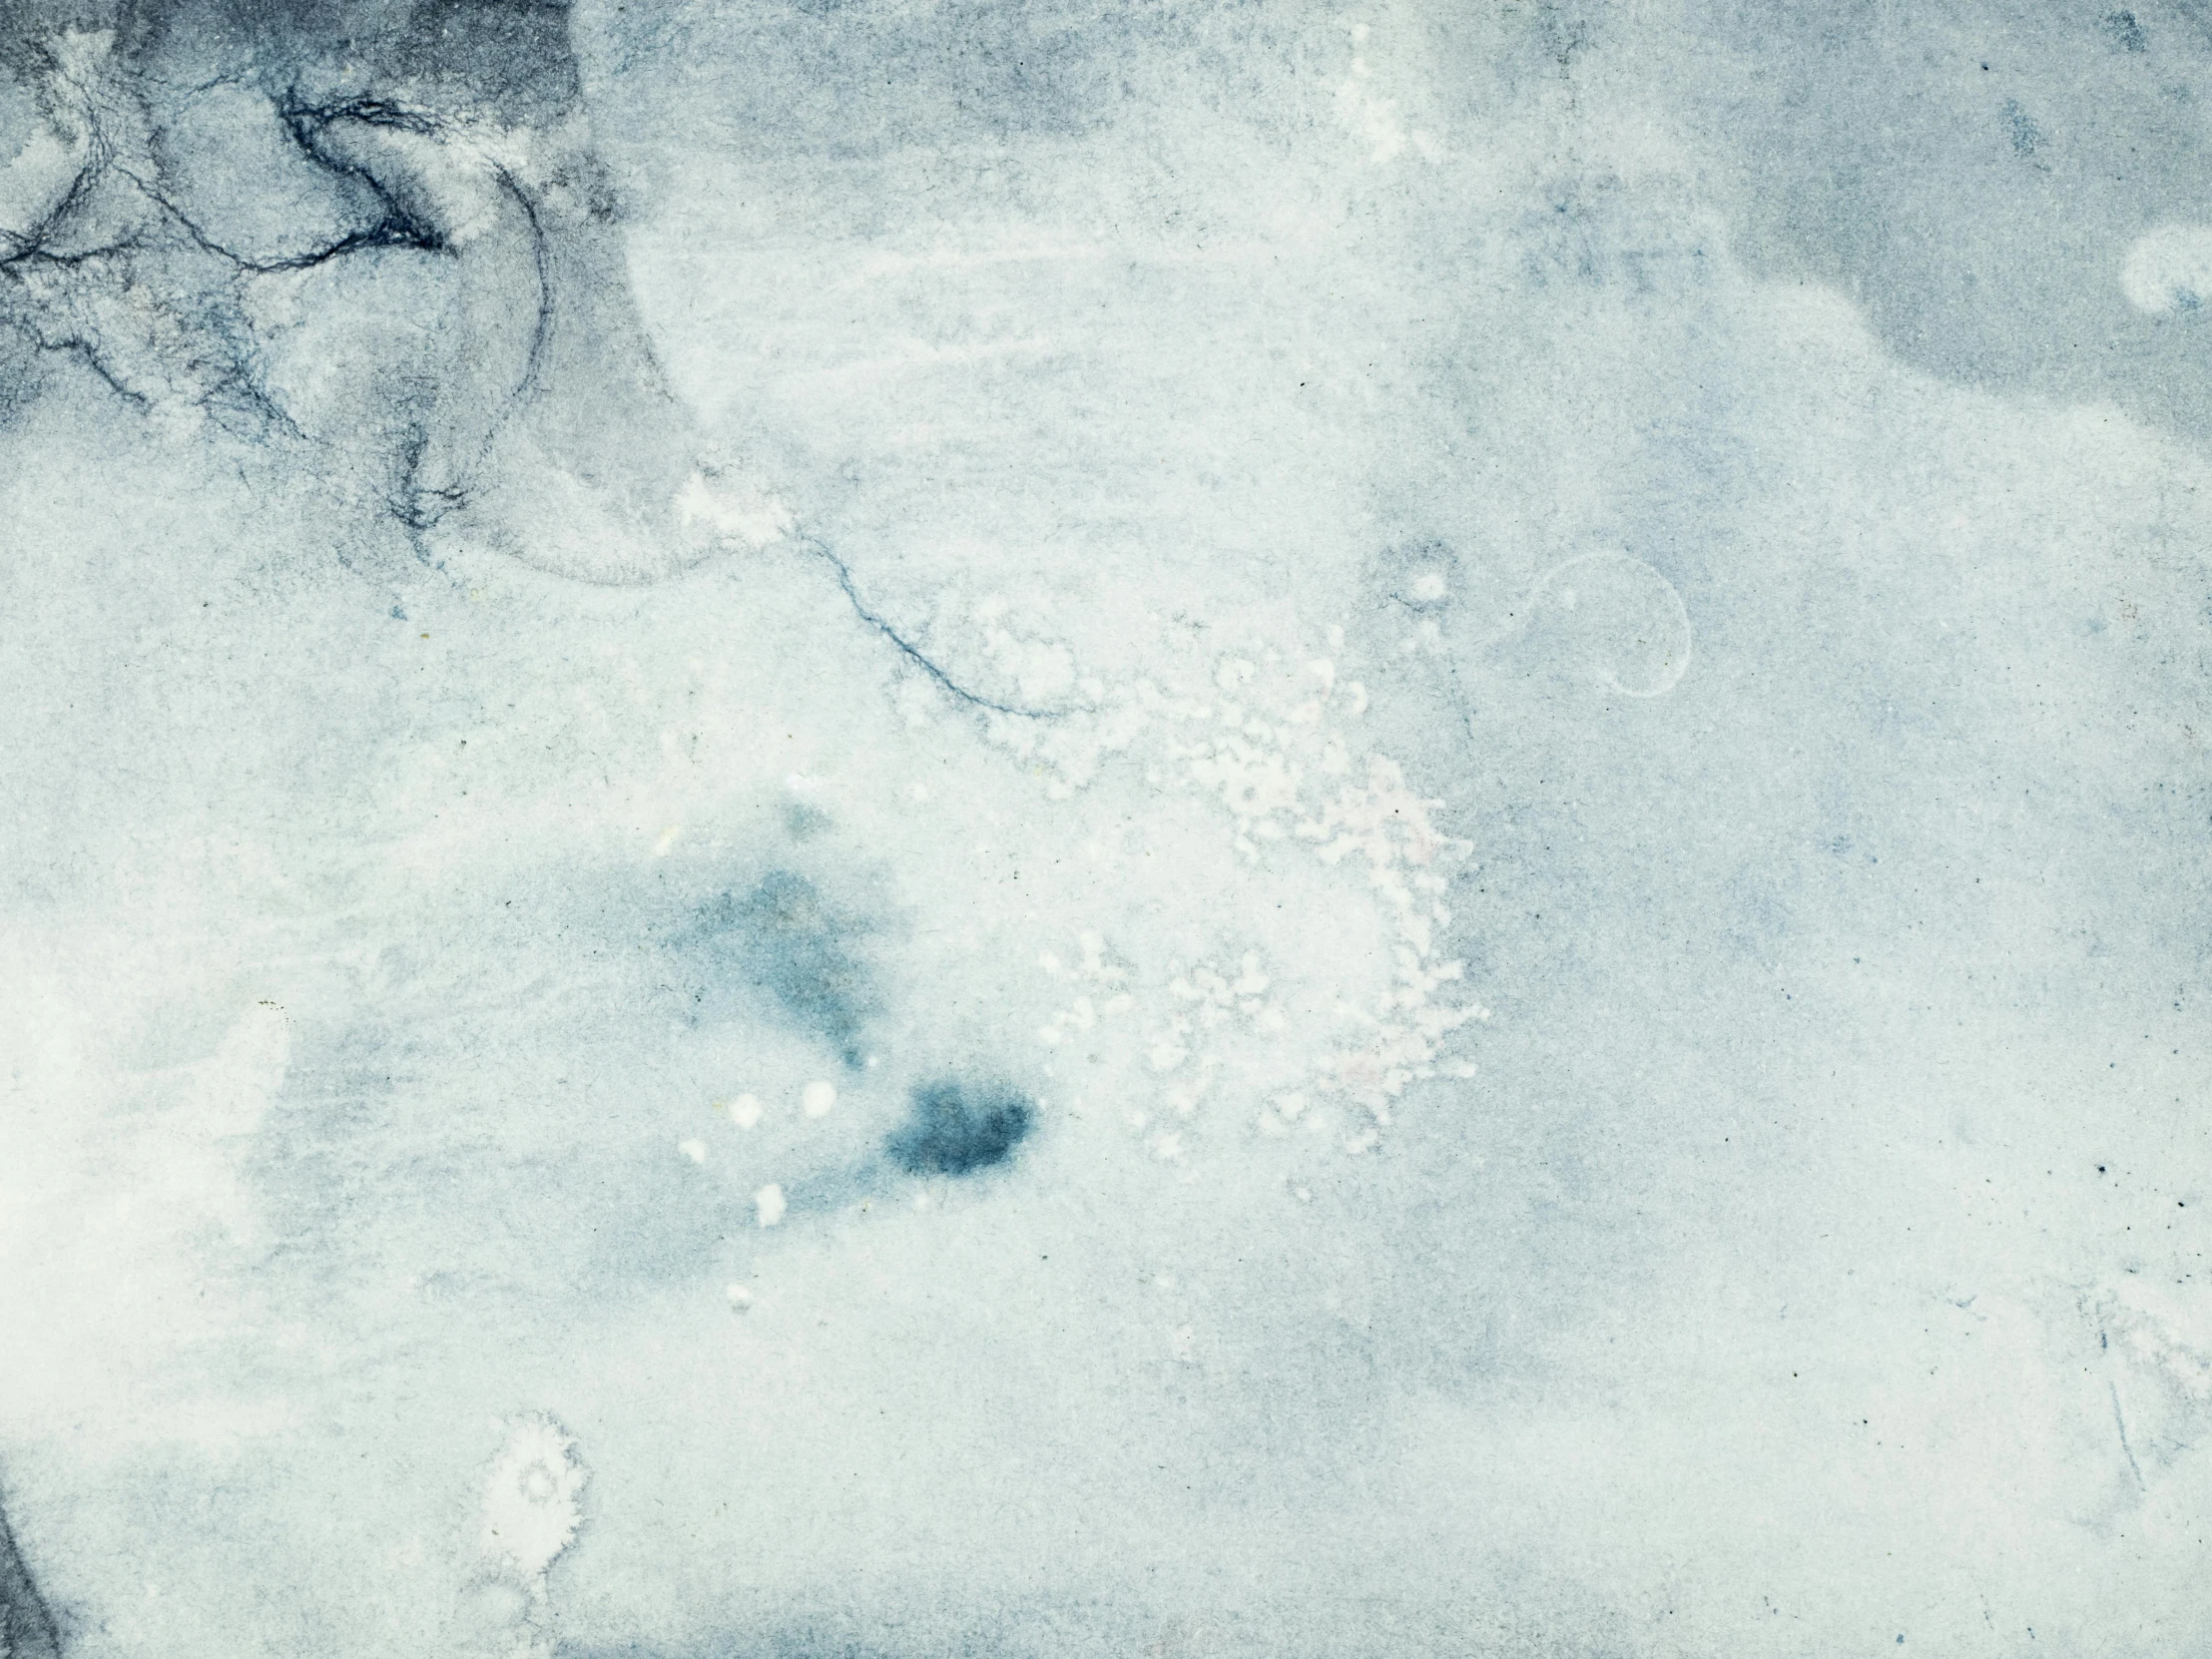 a person riding a snowboard down a snow covered slope, an abstract drawing, inspired by Vija Celmins, unsplash, cyanotype, hazy water, 'untitled 9 ', detail texture